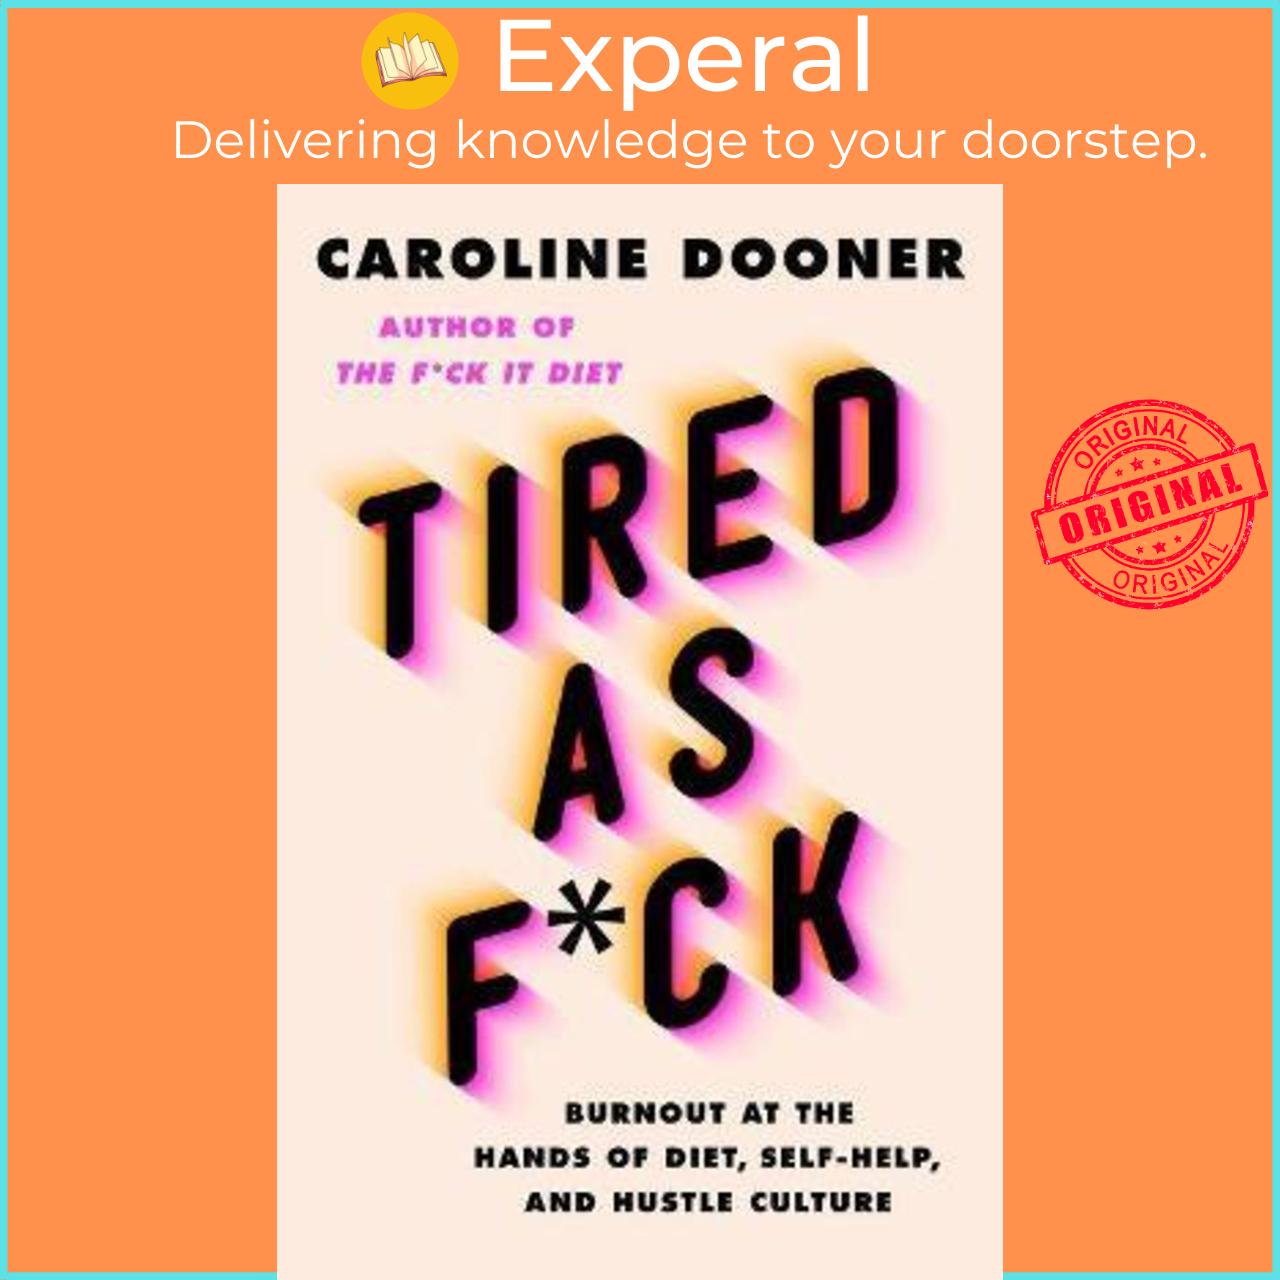 Sách - Tired as F*ck : Burnout at the Hands of Diet, Self-Help, and Hustle Cu by Caroline Dooner (US edition, hardcover)